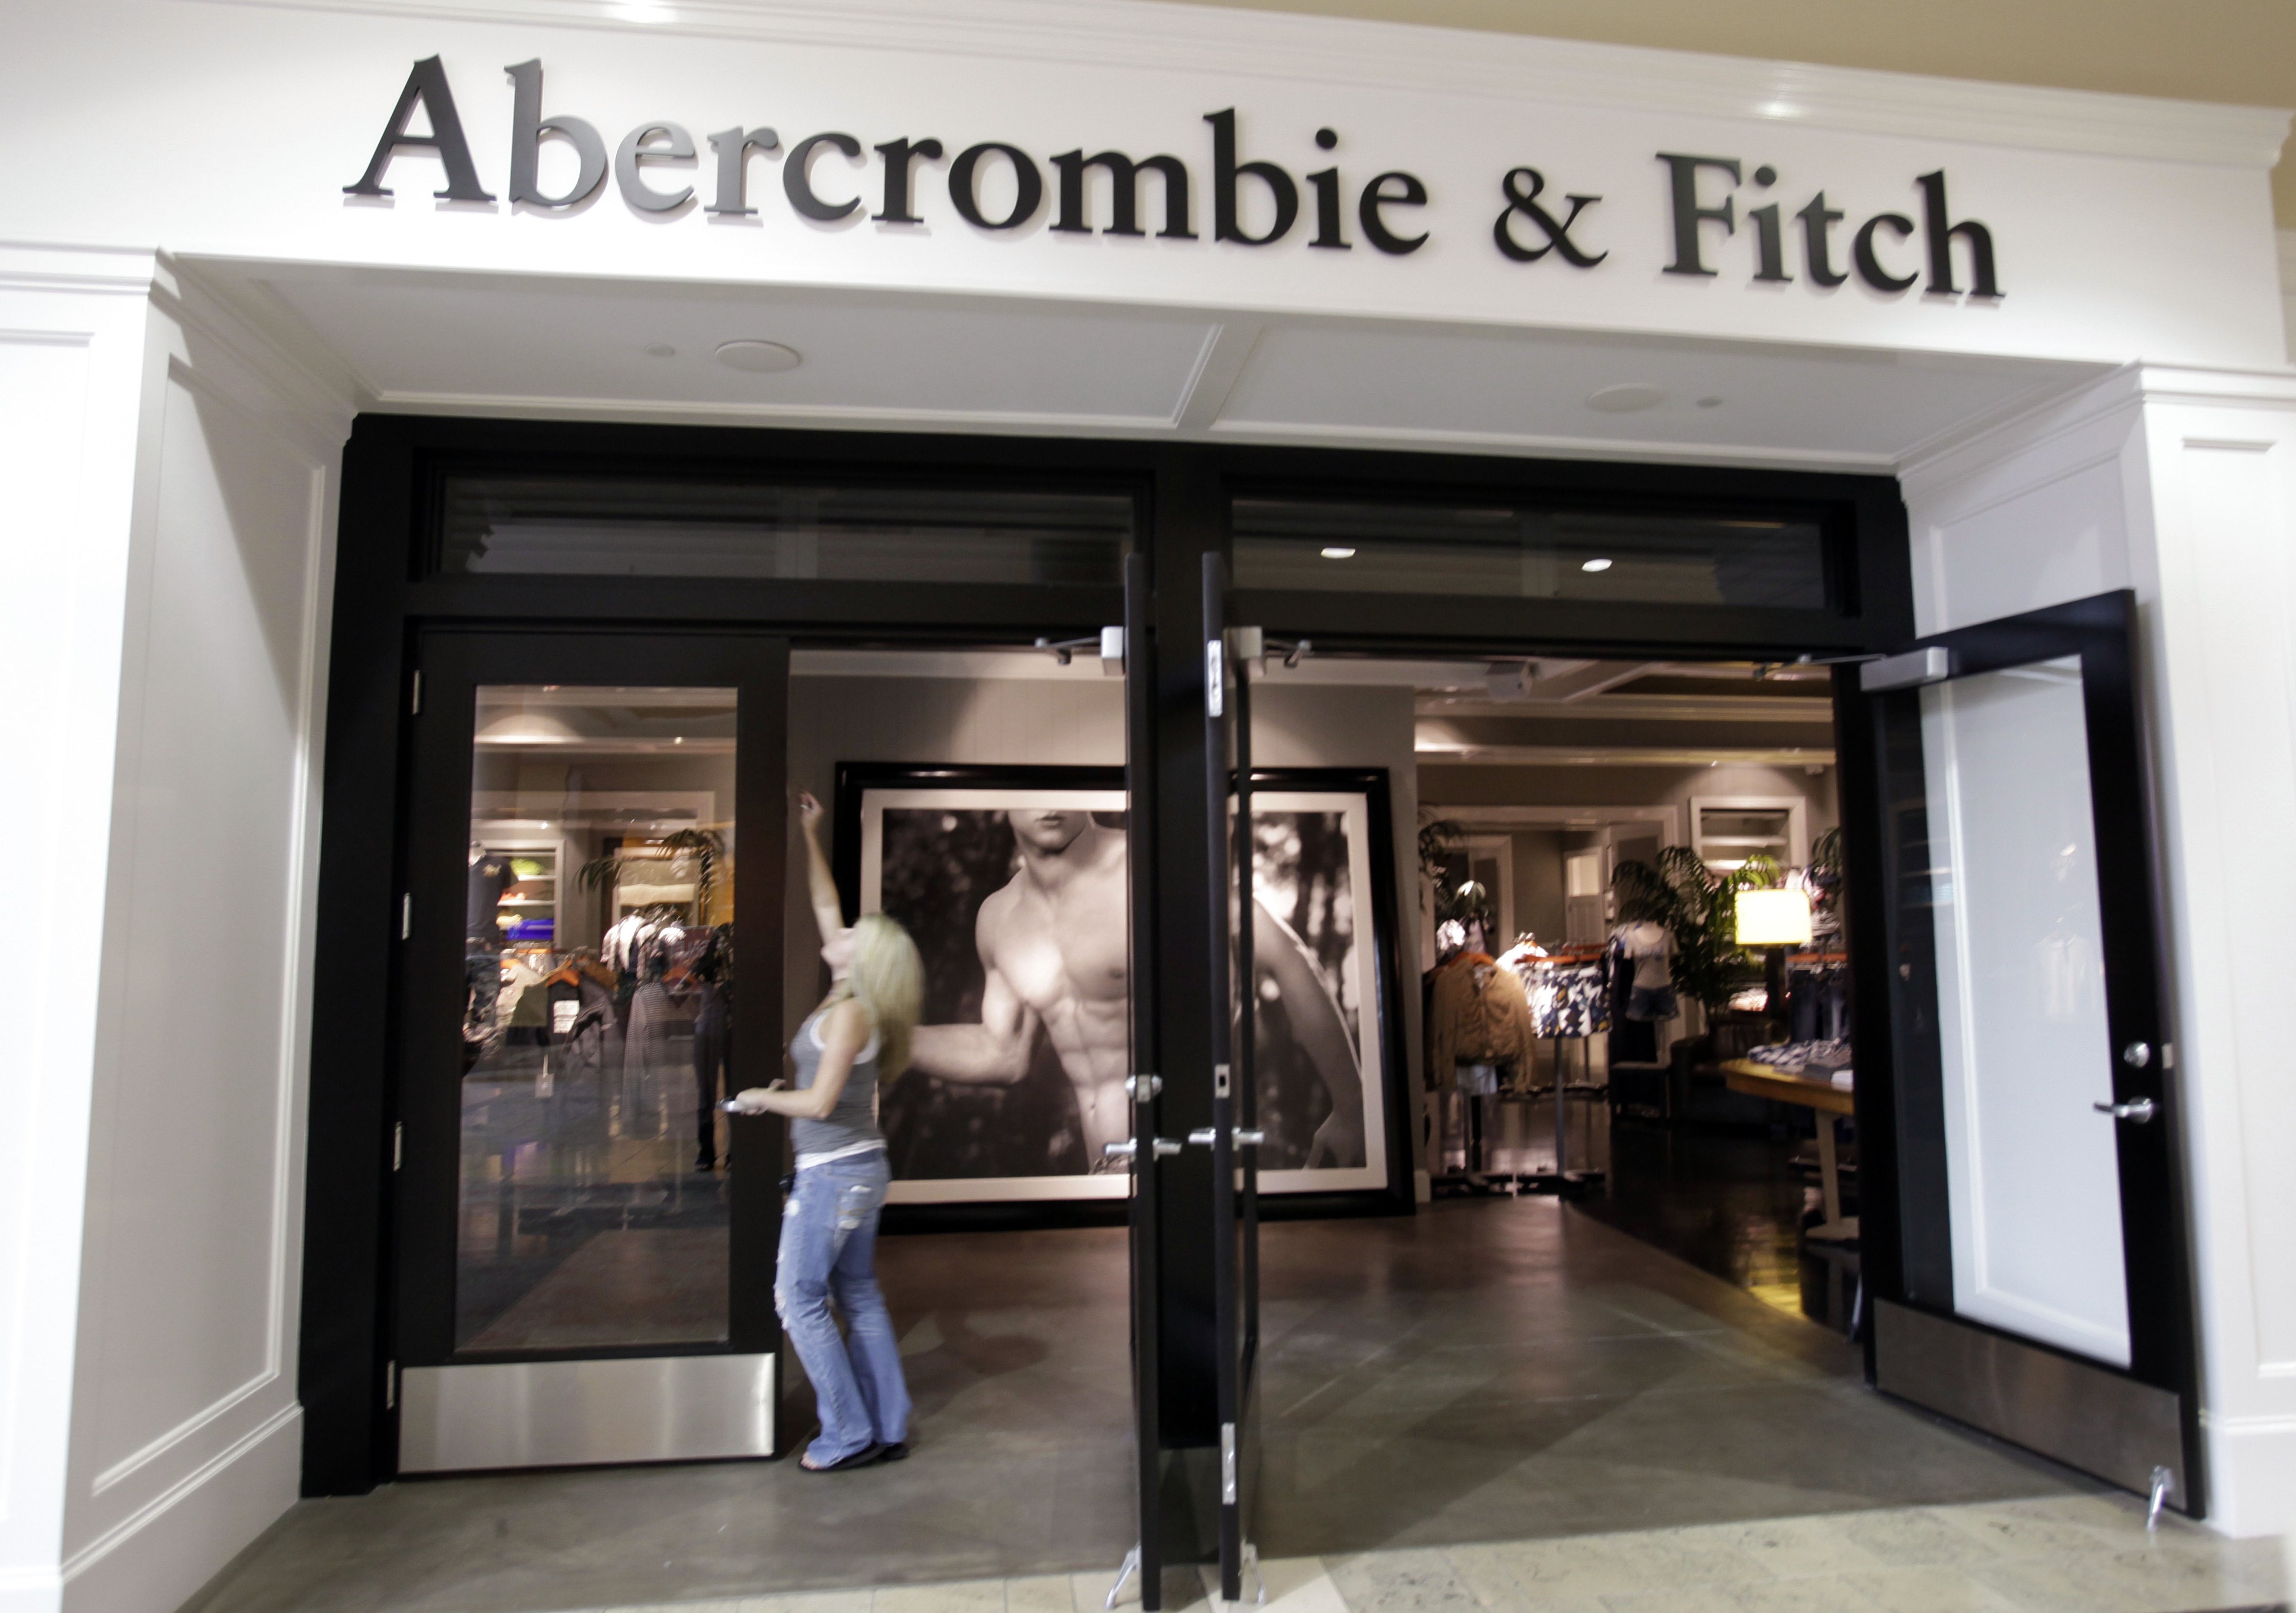 abercrombie and fitch employee dress code